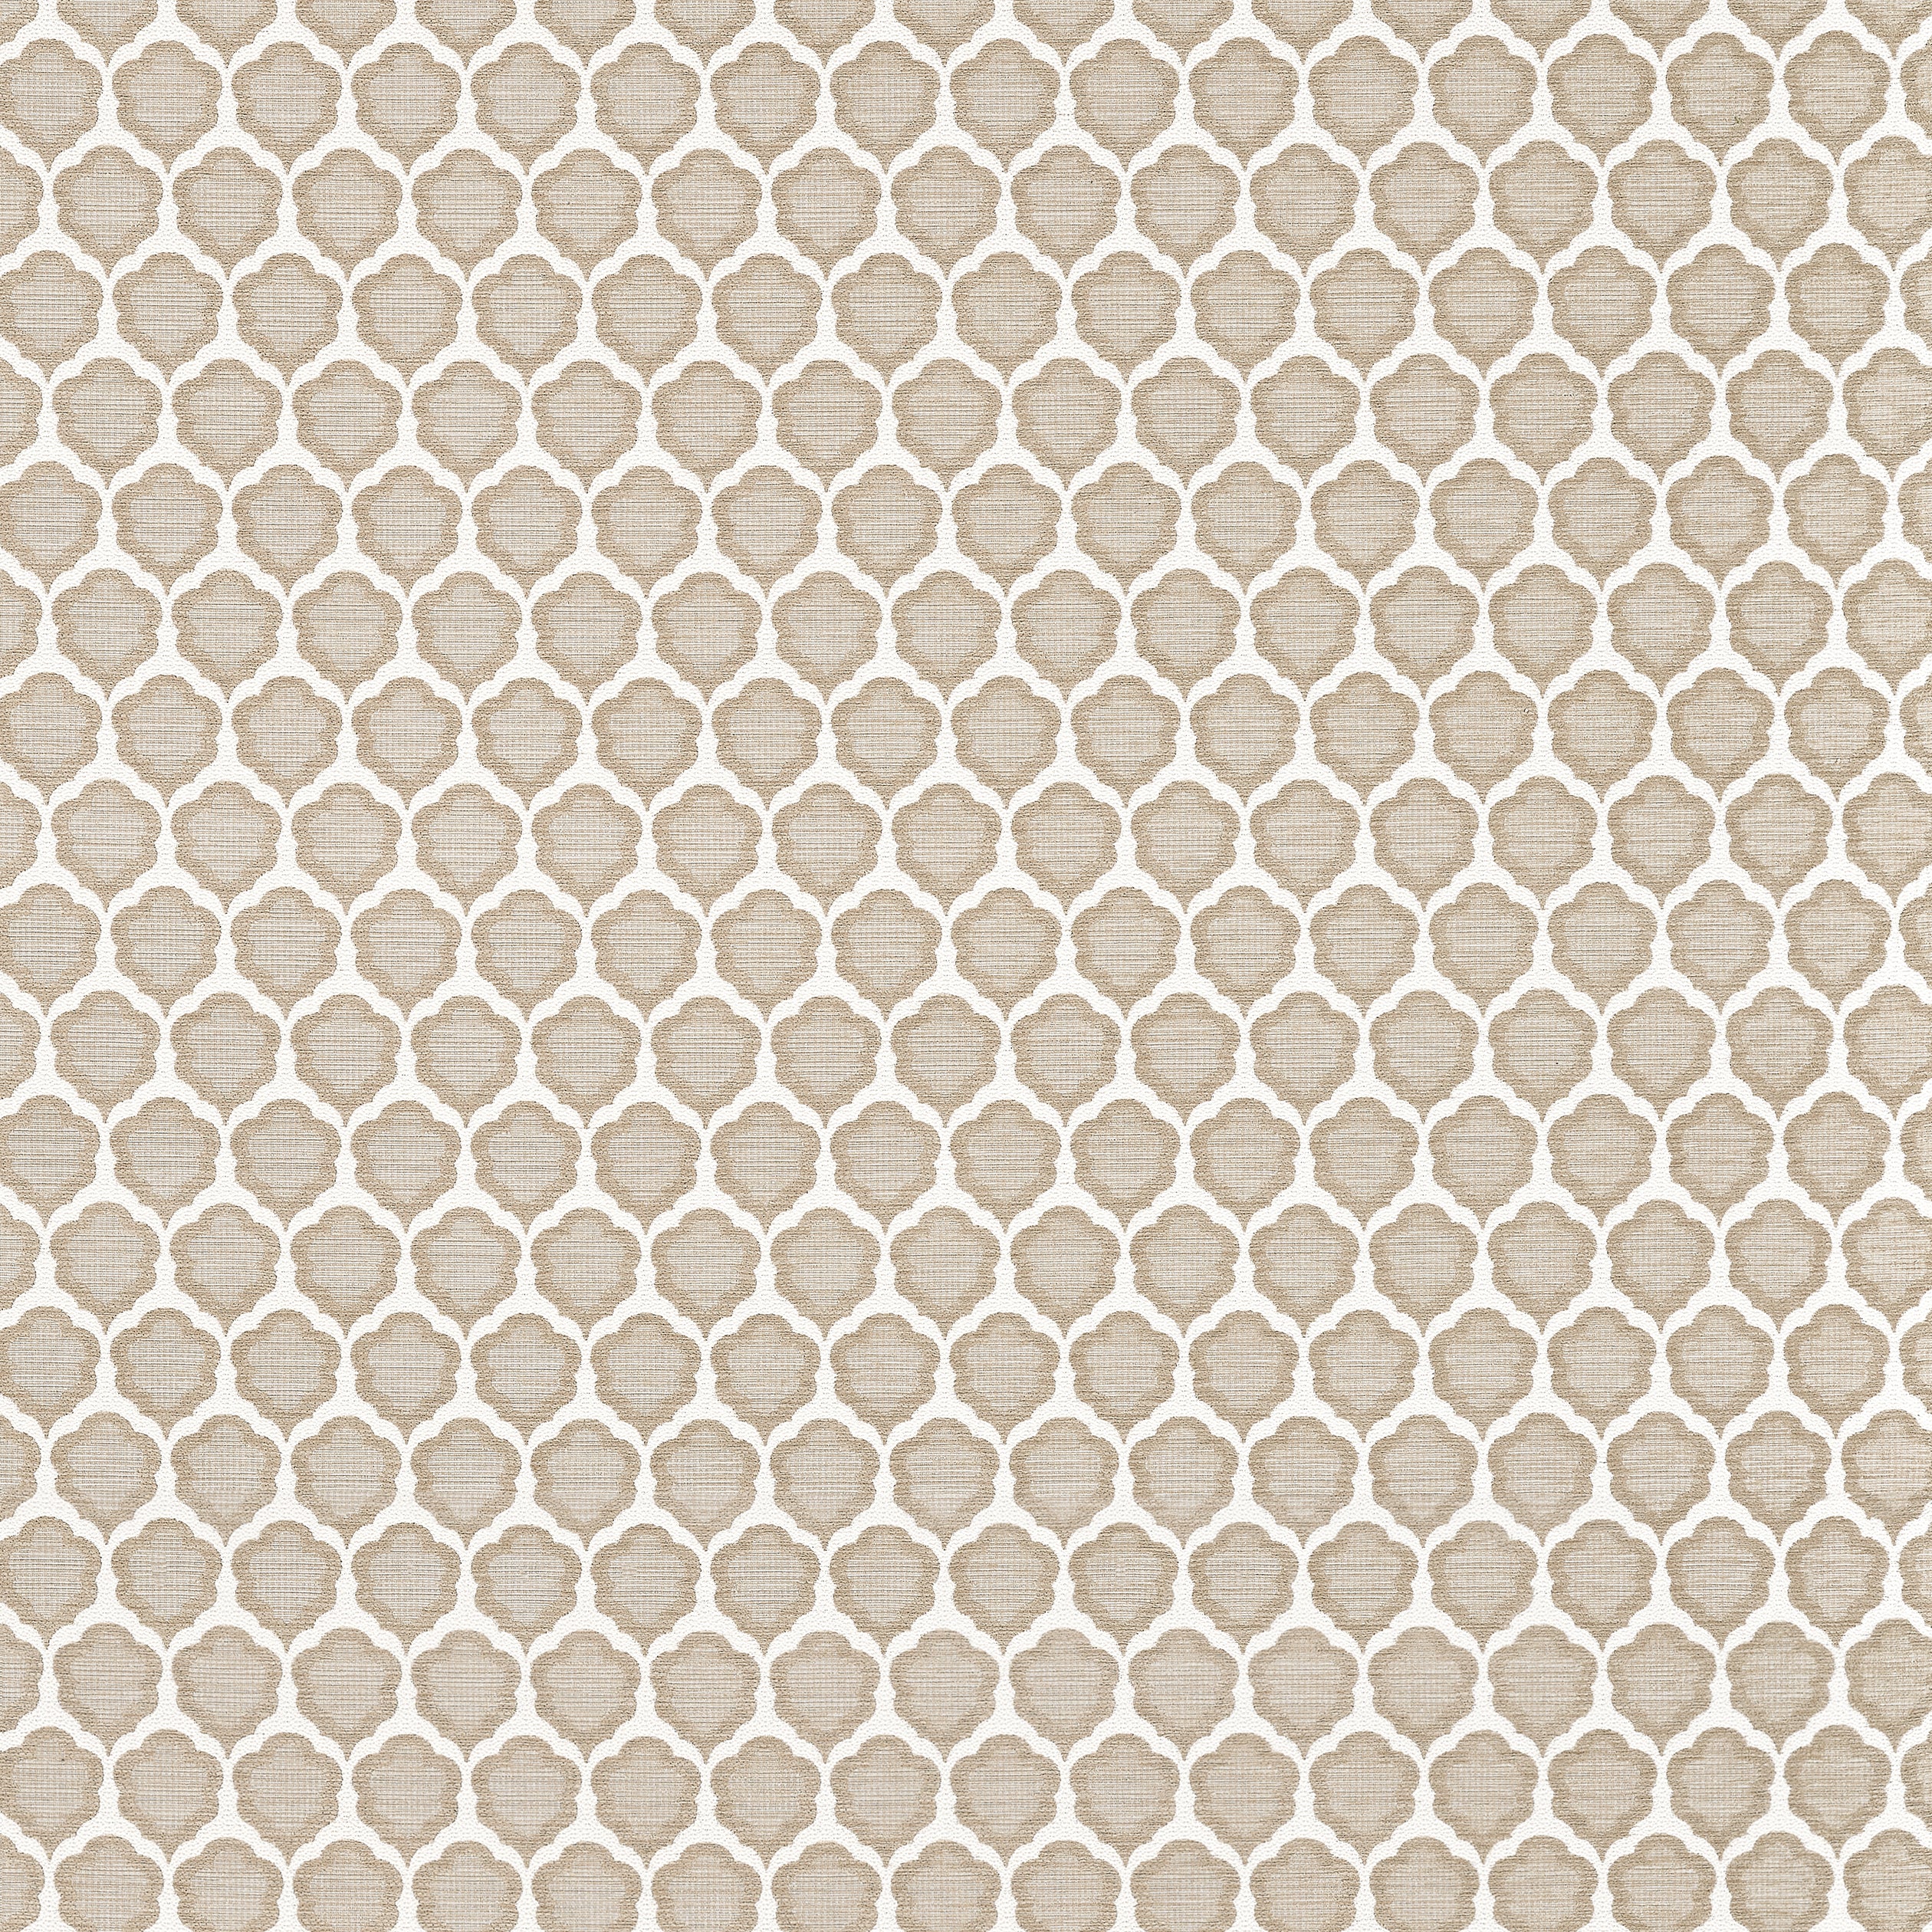 Genie fabric in sand color - pattern number W81928 - by Thibaut in the Companions collection